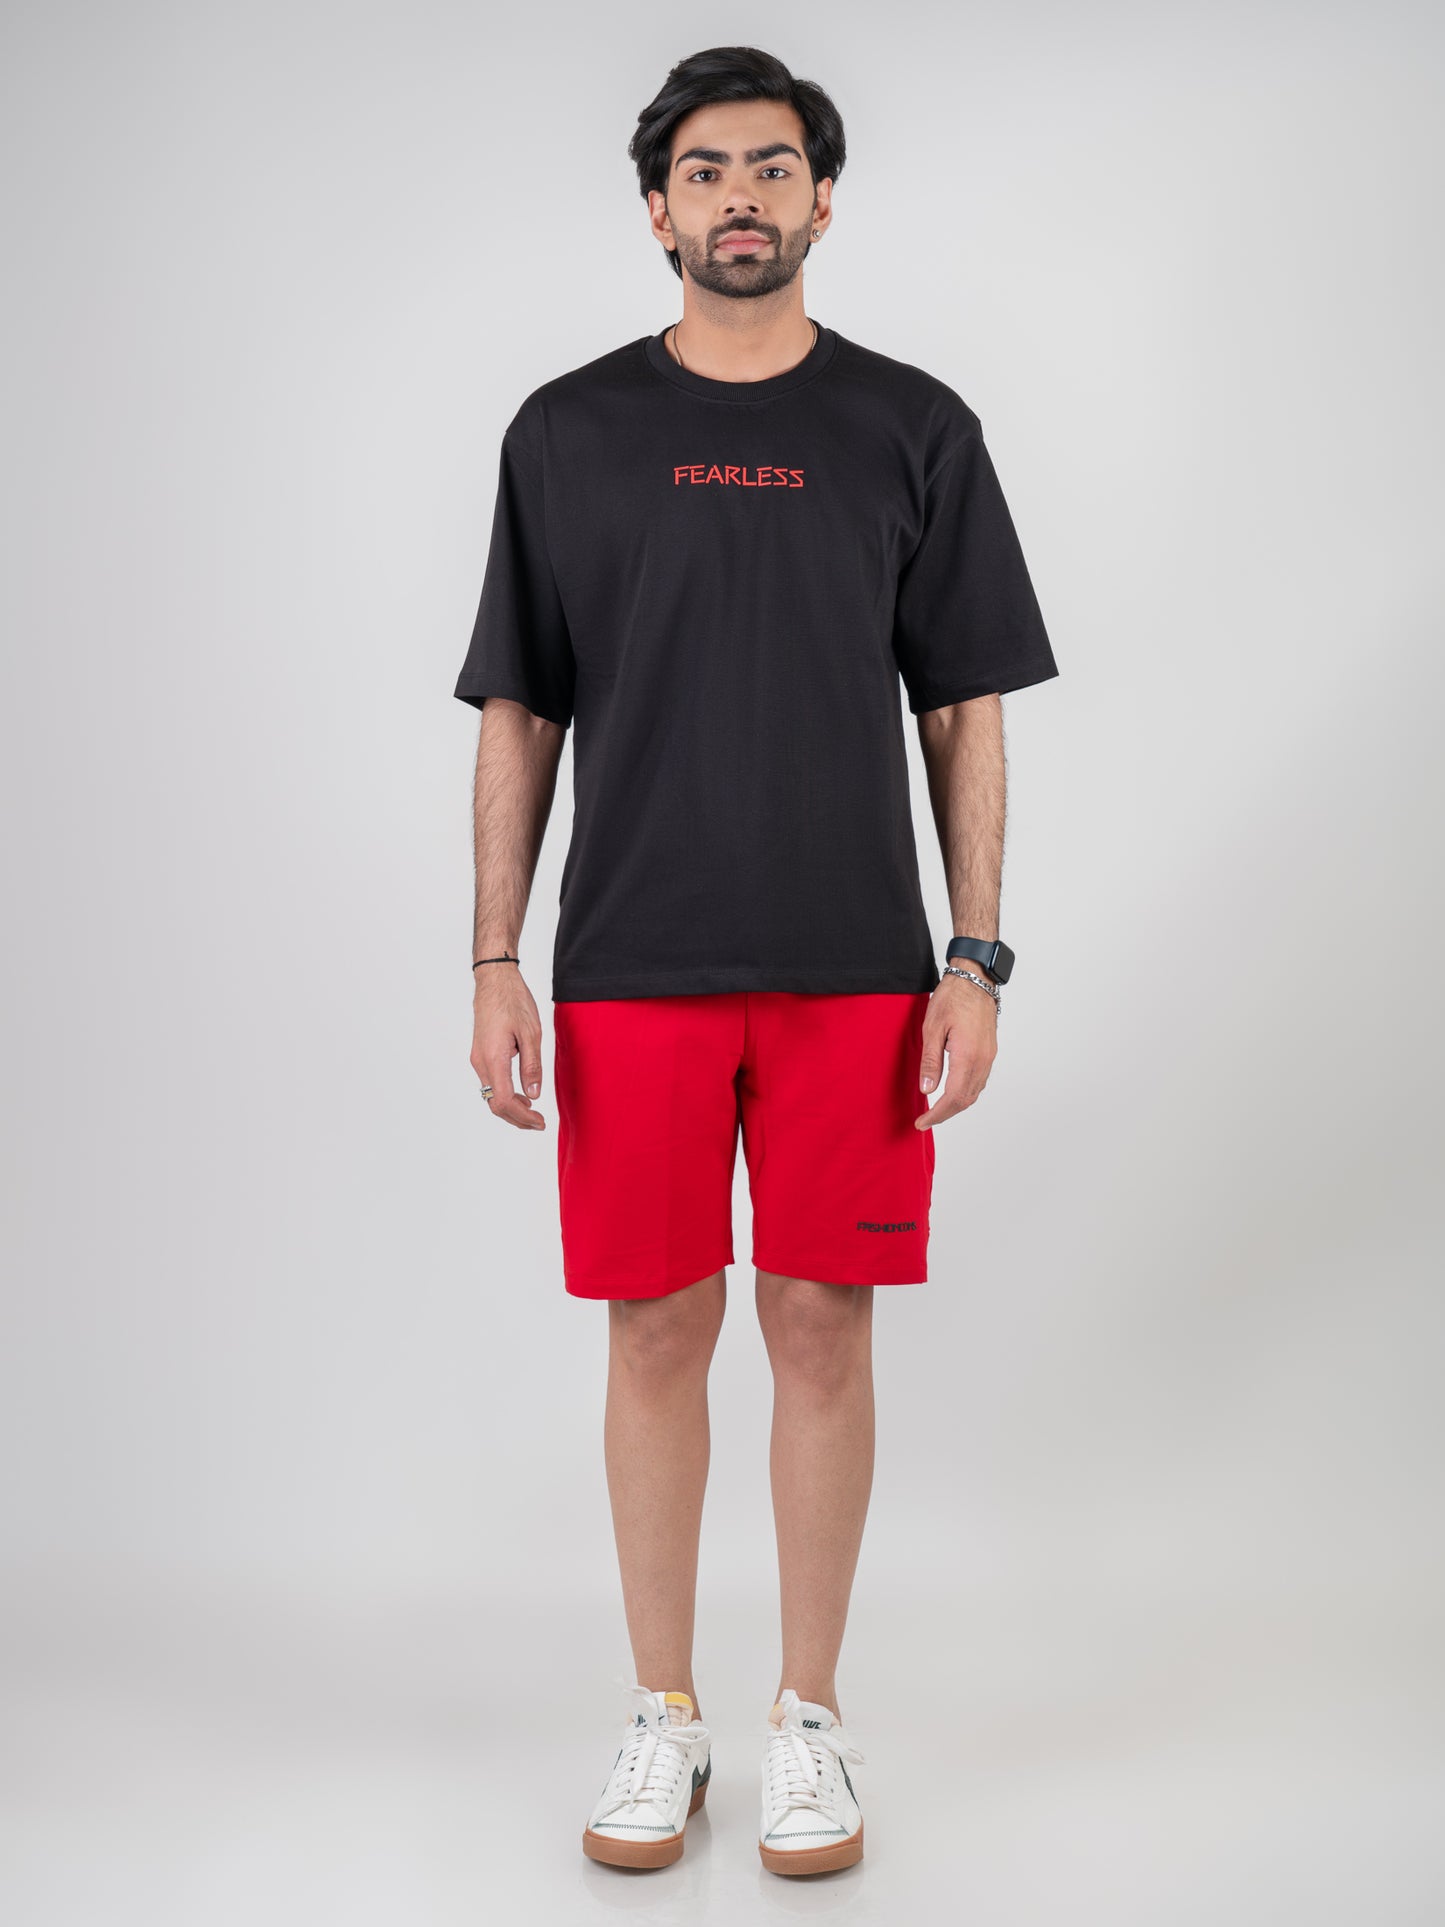 Classic Black T-shirt & Red Shorts Co-Ords Set for Men